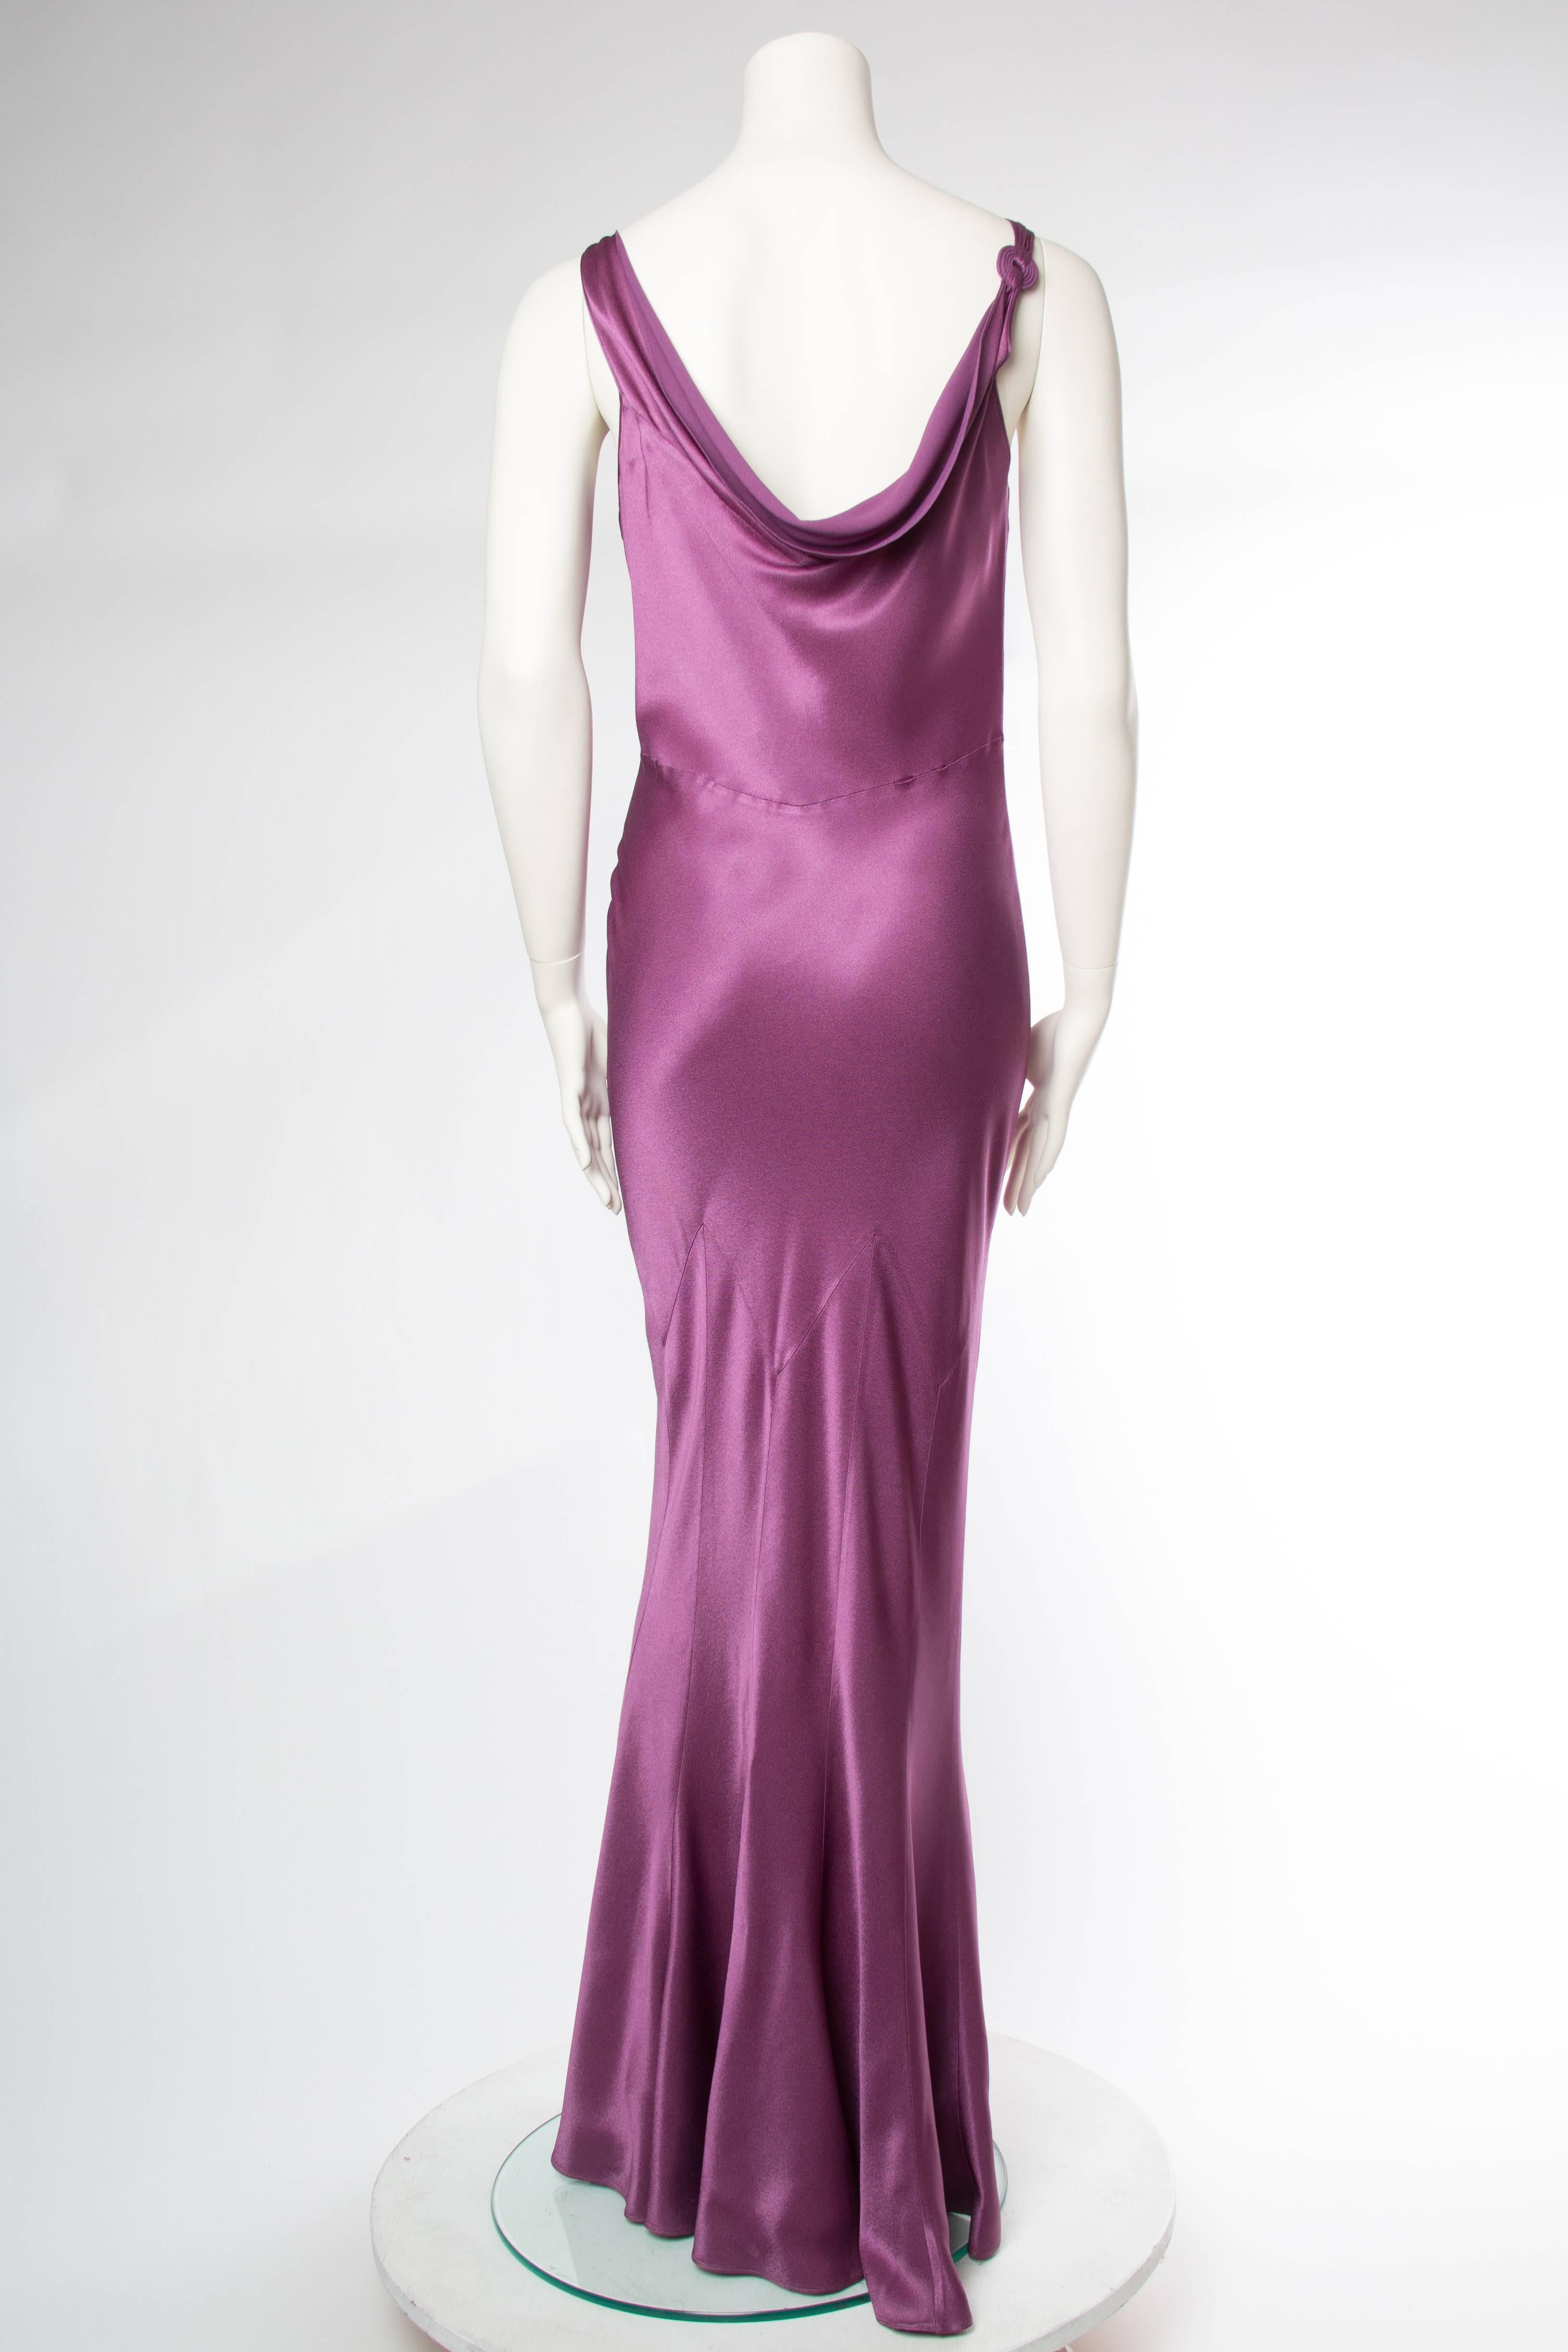 Women's John Galliano 1930s Style Bias Cut Satin Gown with Matching Stole